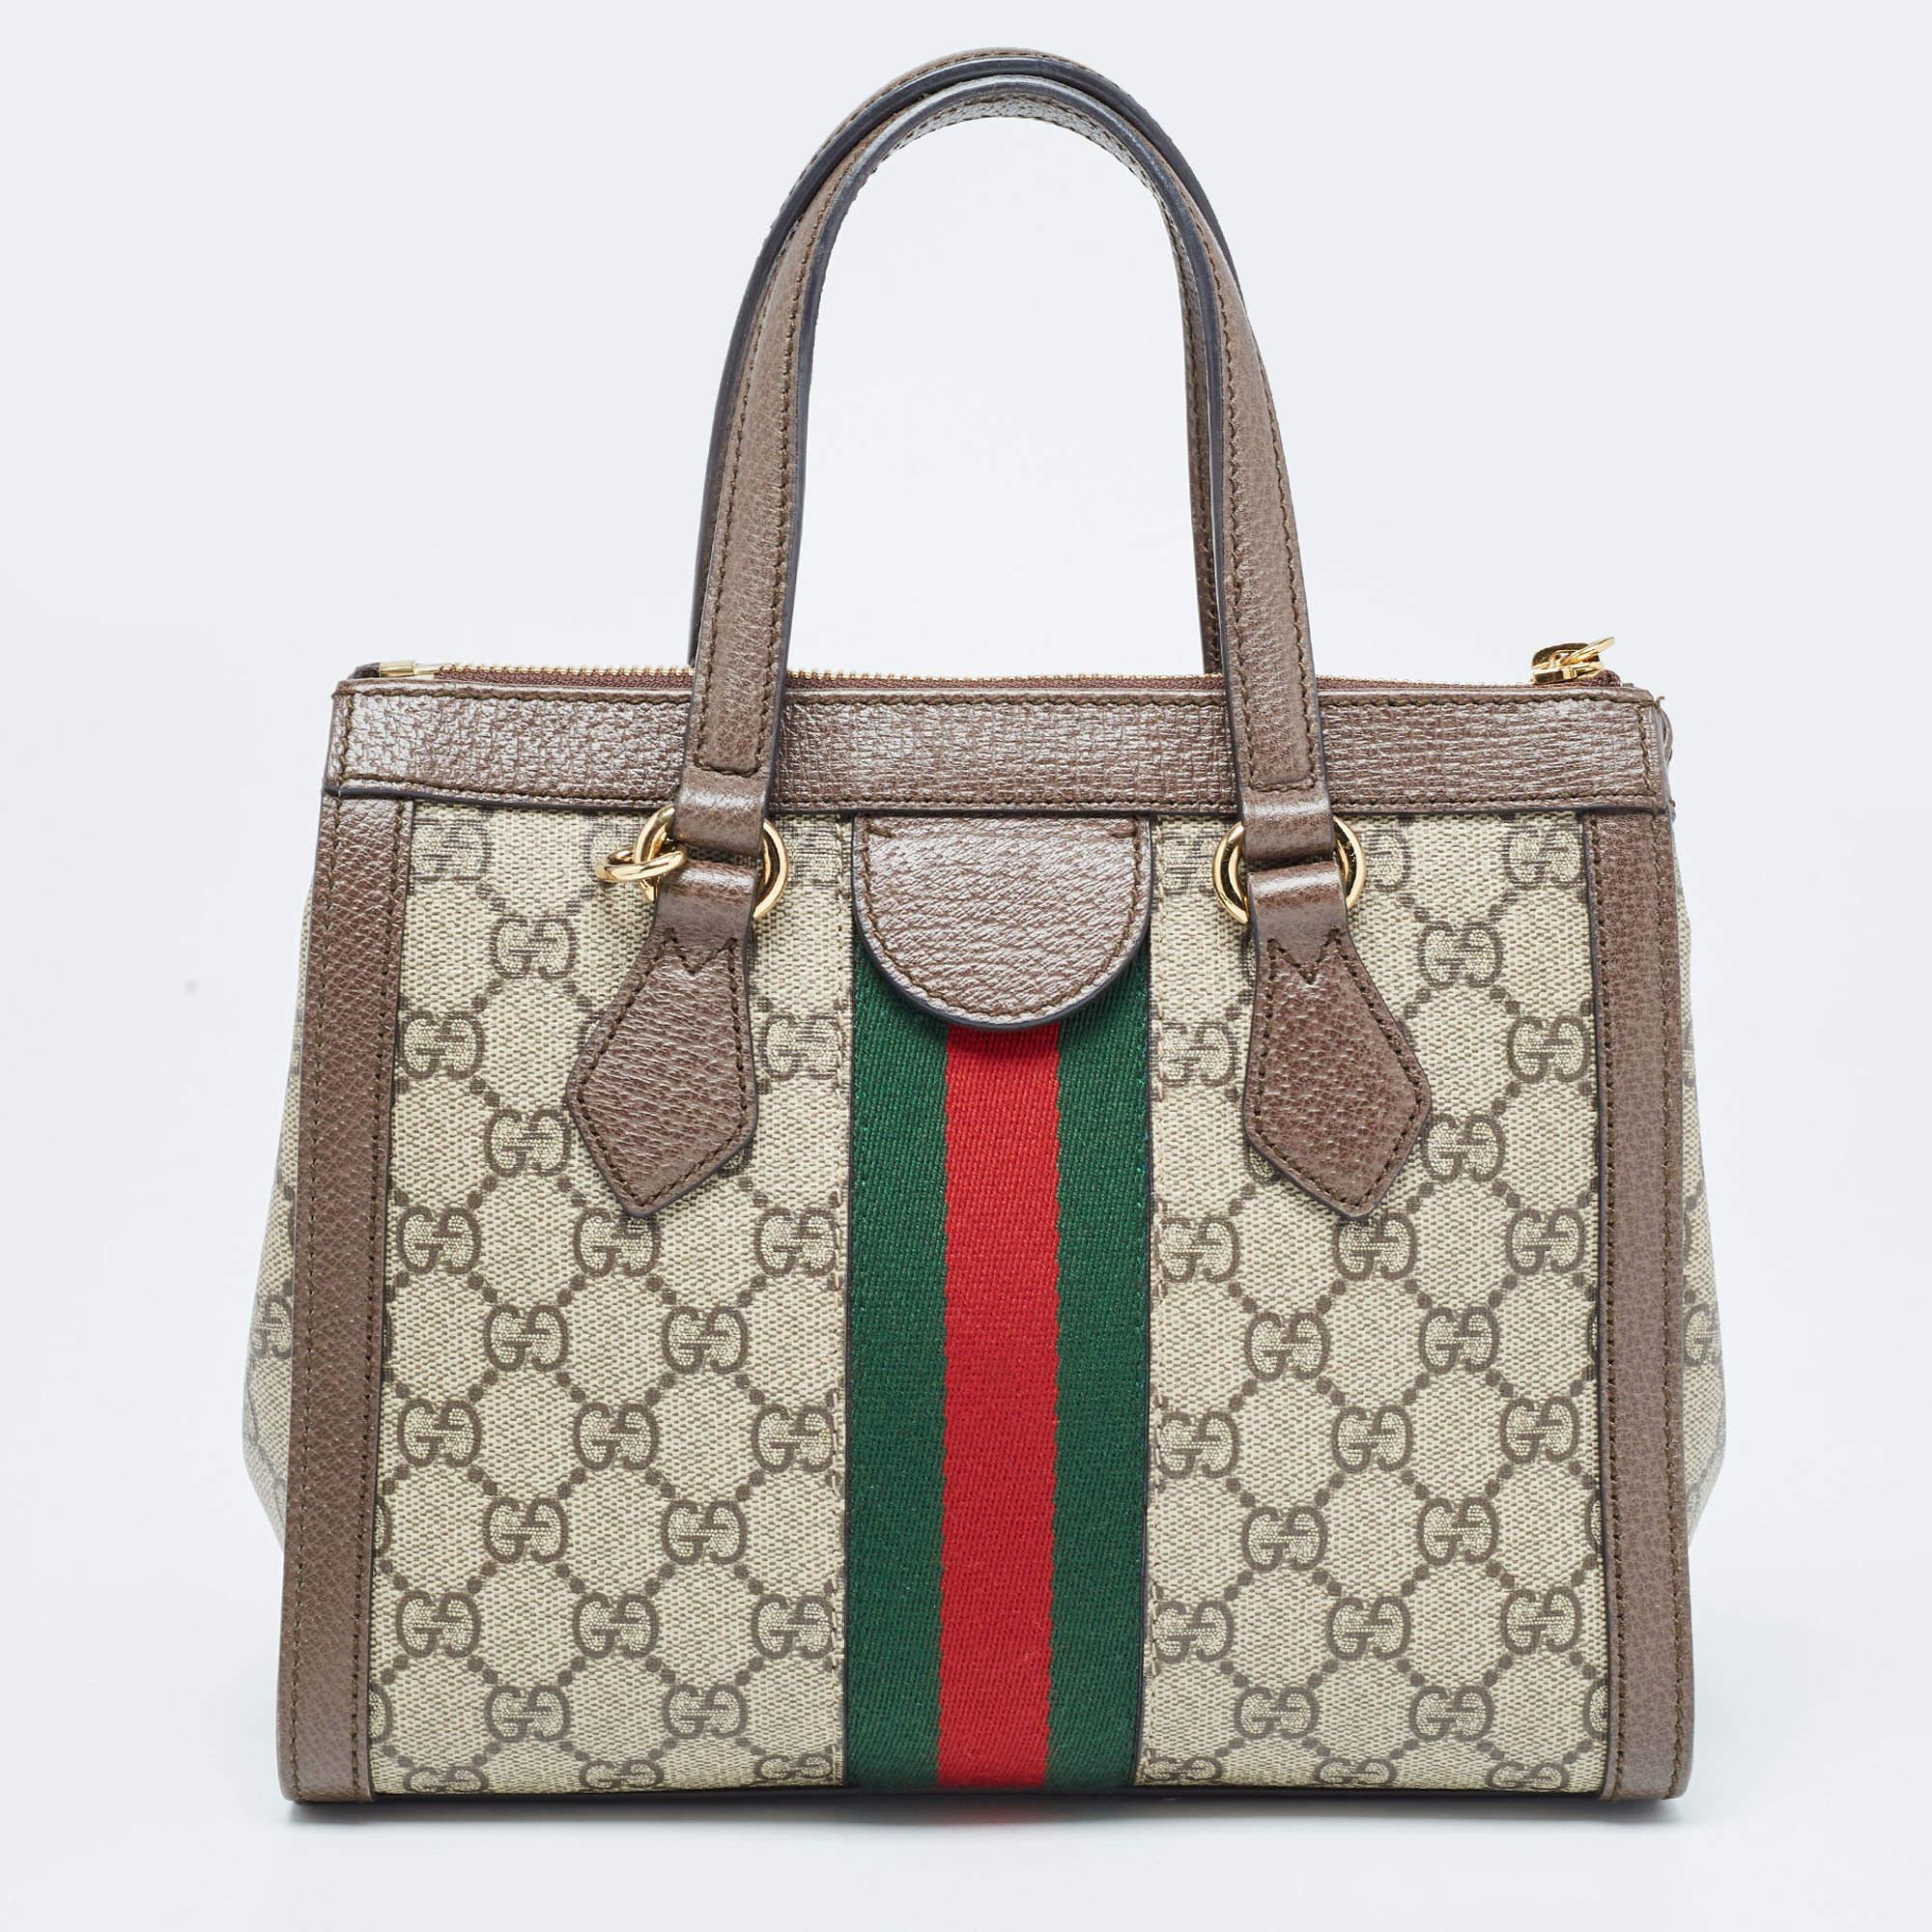 Crafted from GG Supreme canvas and leather, this Gucci Ophidia bag comes in a structured shape for a sophisticated look. It features the iconic Web stripe, and the GG motif—all Gucci codes. The bag suspends from two handles and a slender strap for